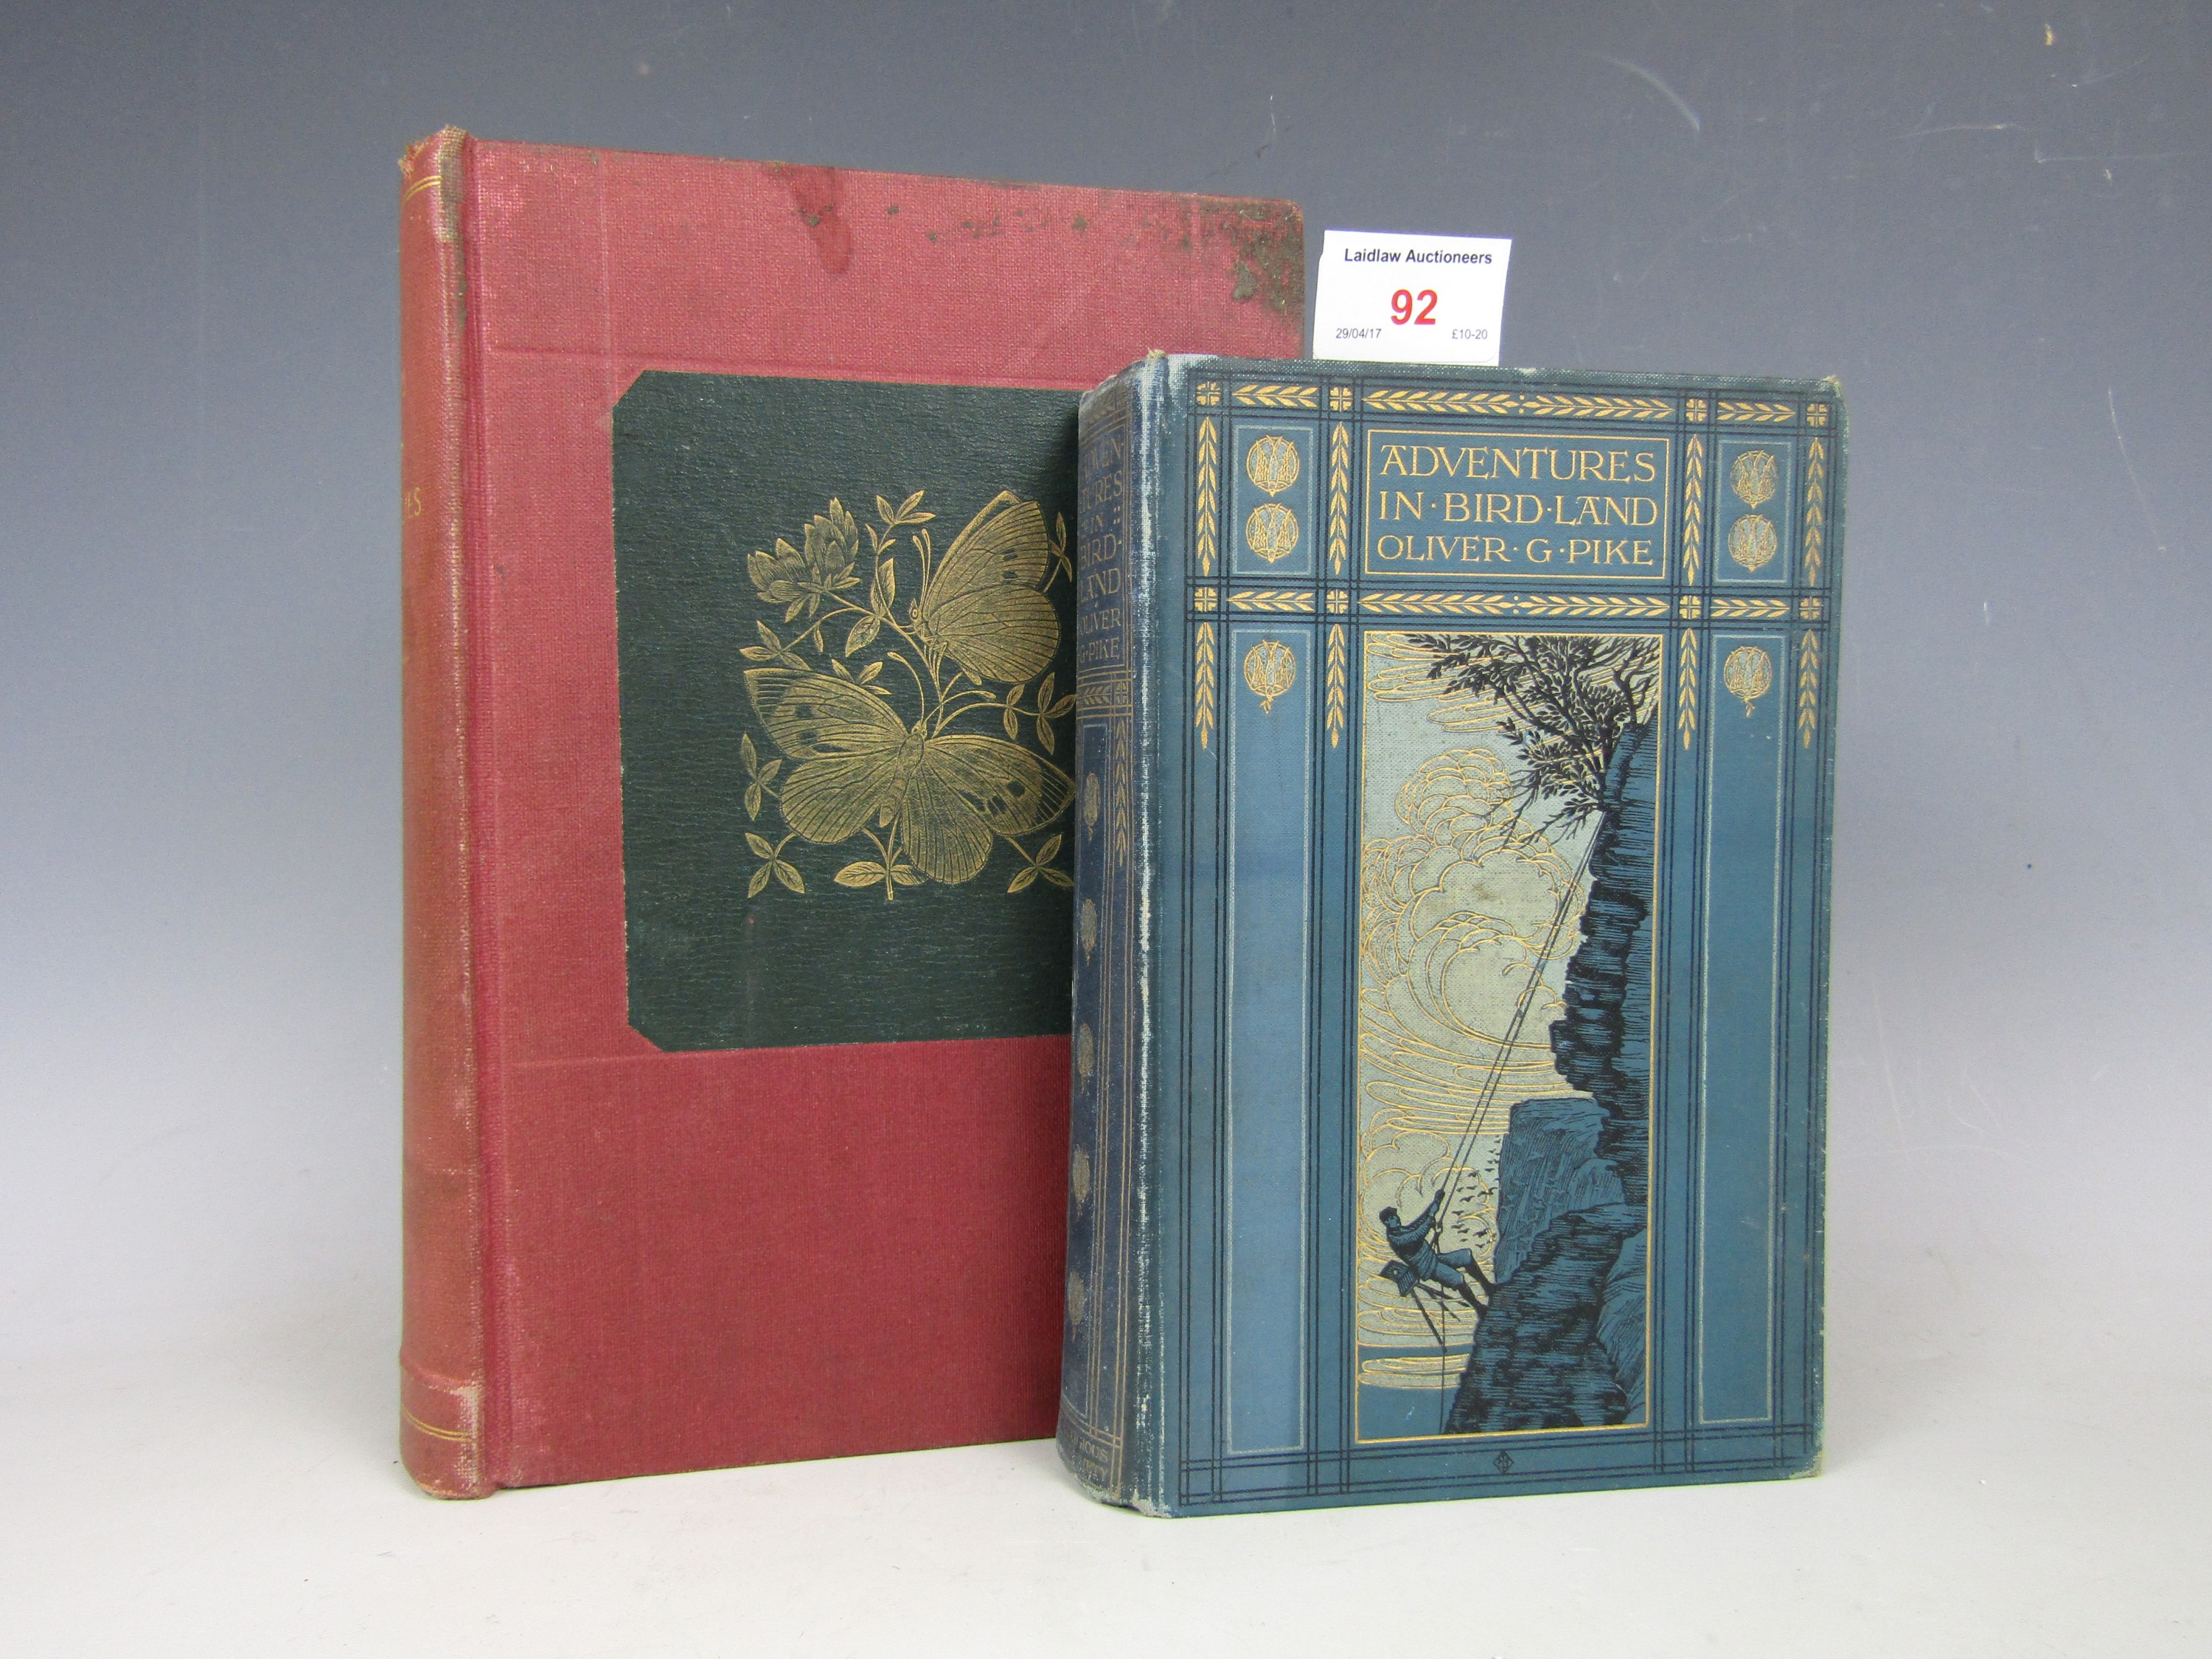 Two 19th Century nature themed books including Adventures in Bird Land by Oliver G Pike and Morris's